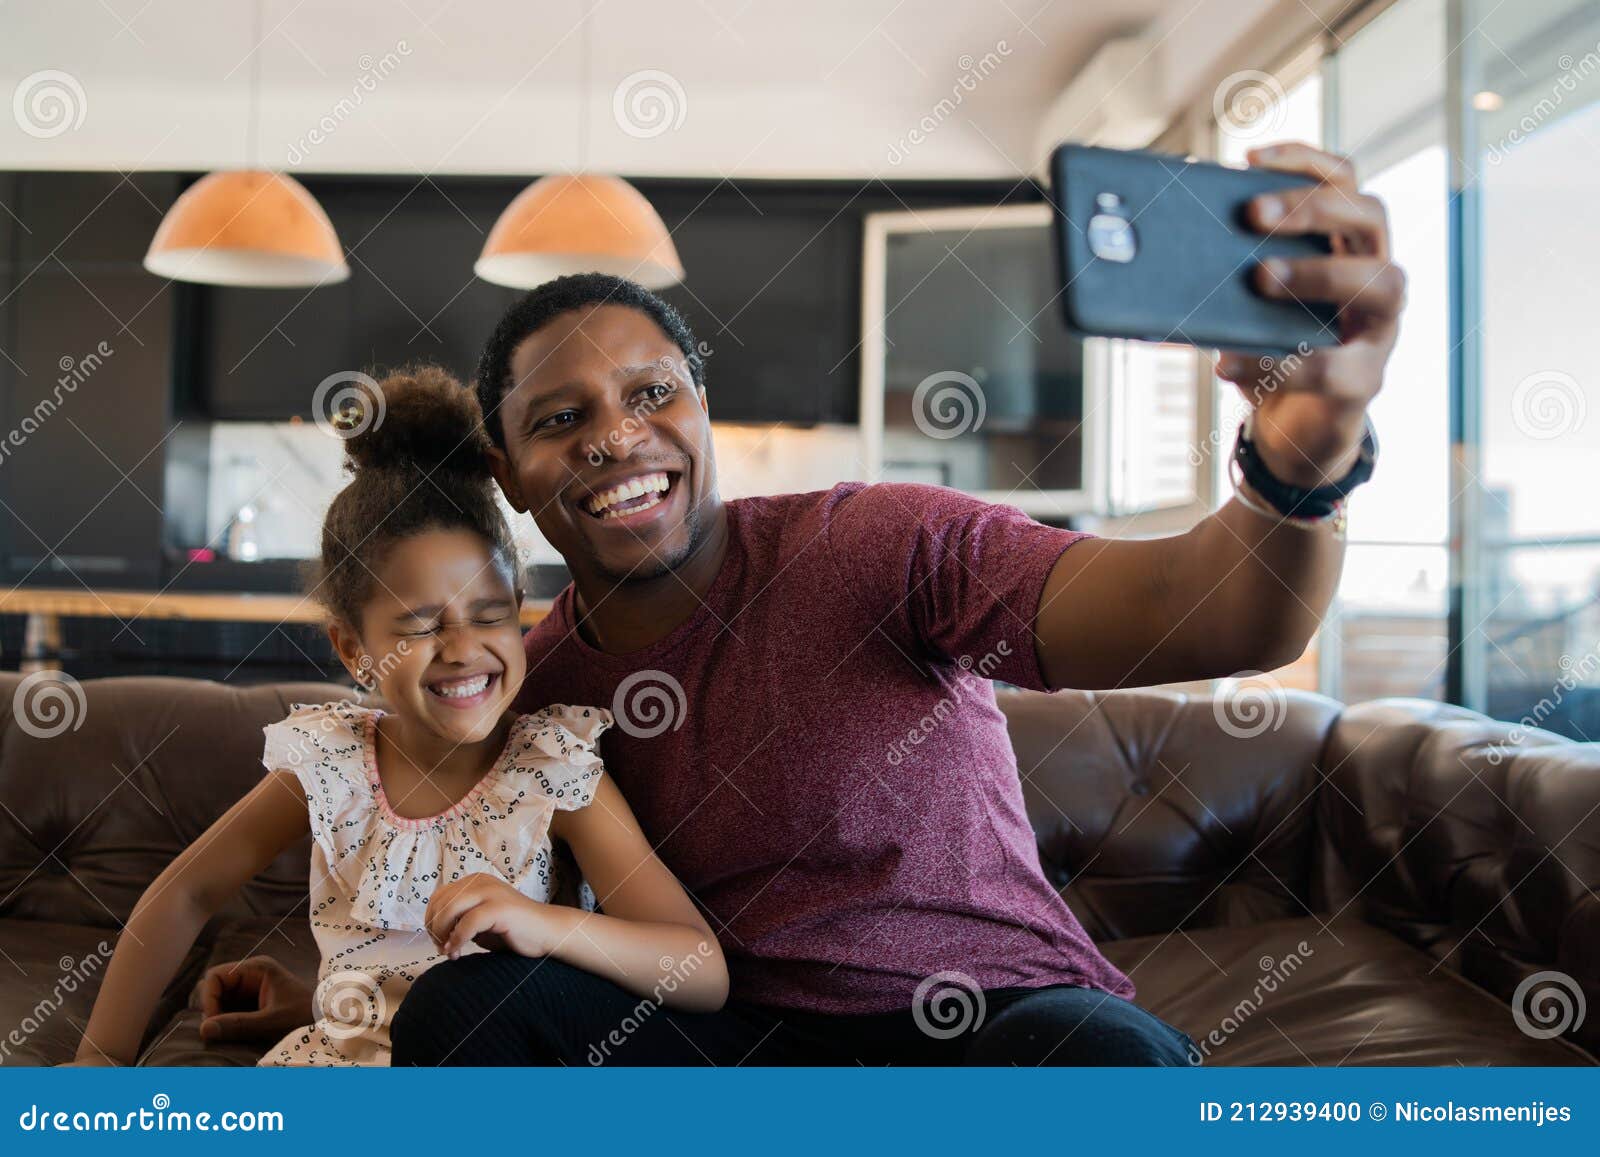 daughter and father taking a selfie with phone.